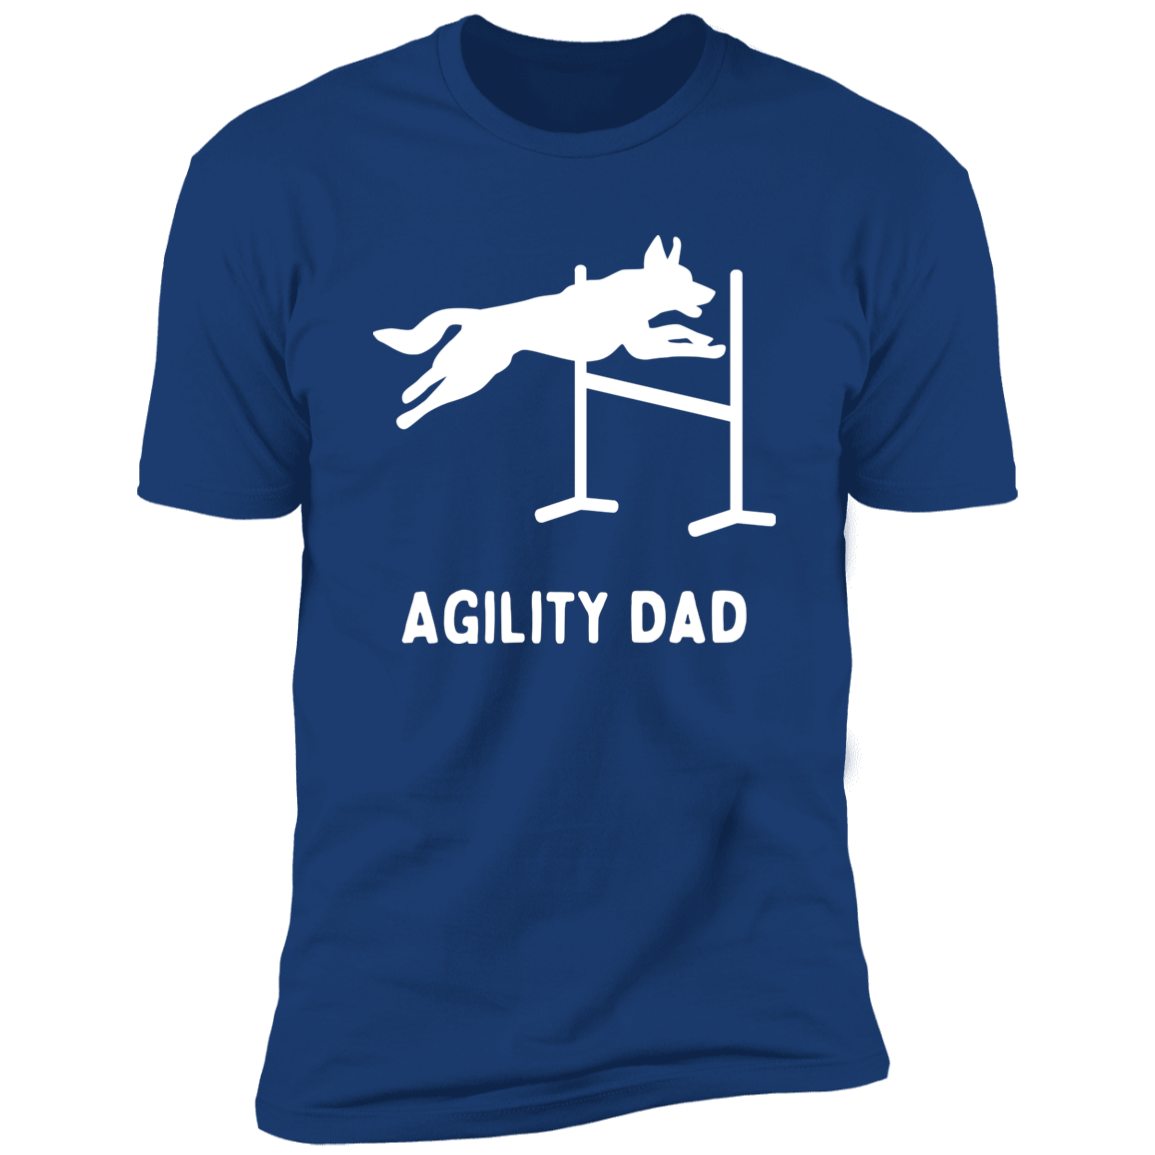 Agility Dad Agility Dog Dog T-Shirt for humans, in royal blue